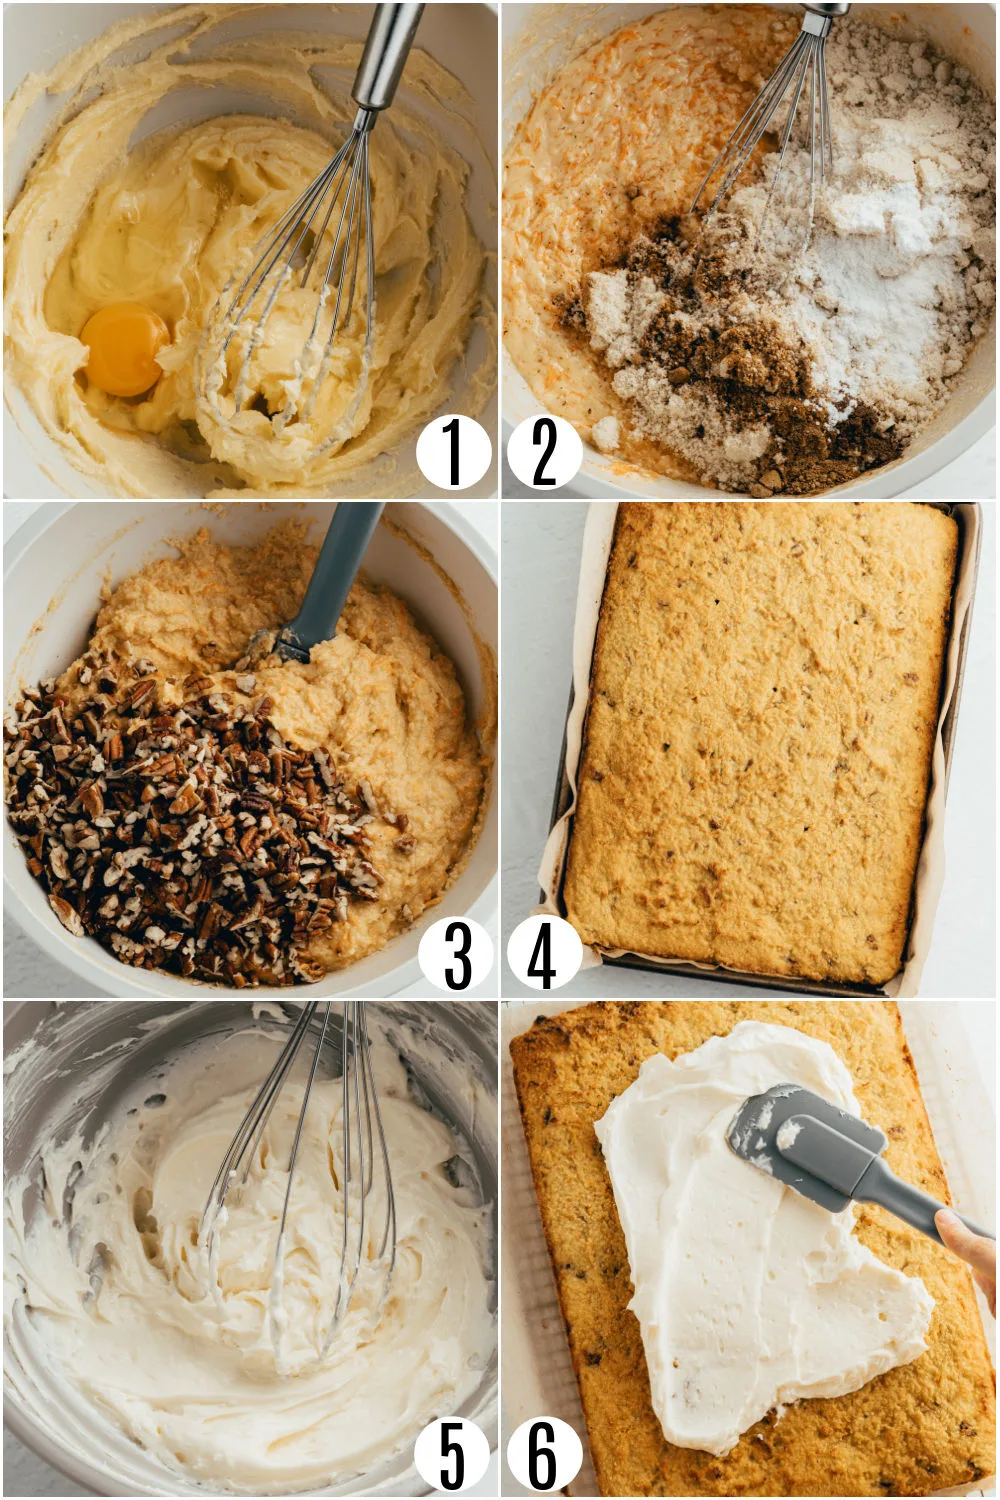 Step by step photos showing how to make sugar free carrot cake.